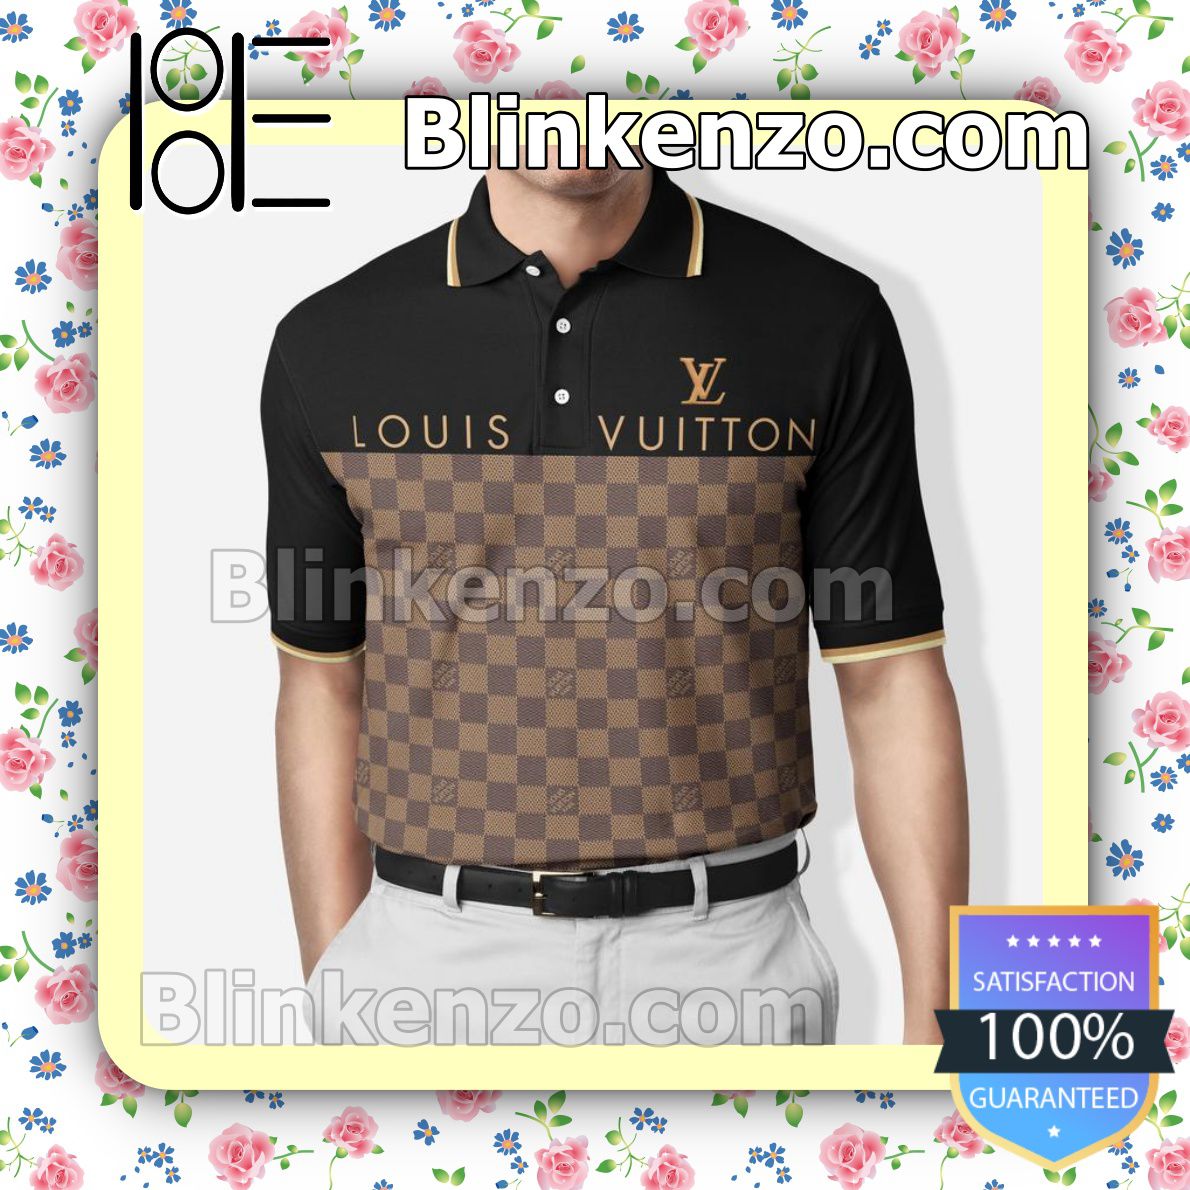 Louis Vuitton Light And Dark Checkerboard Mix Black Embroidered Polo Shirts